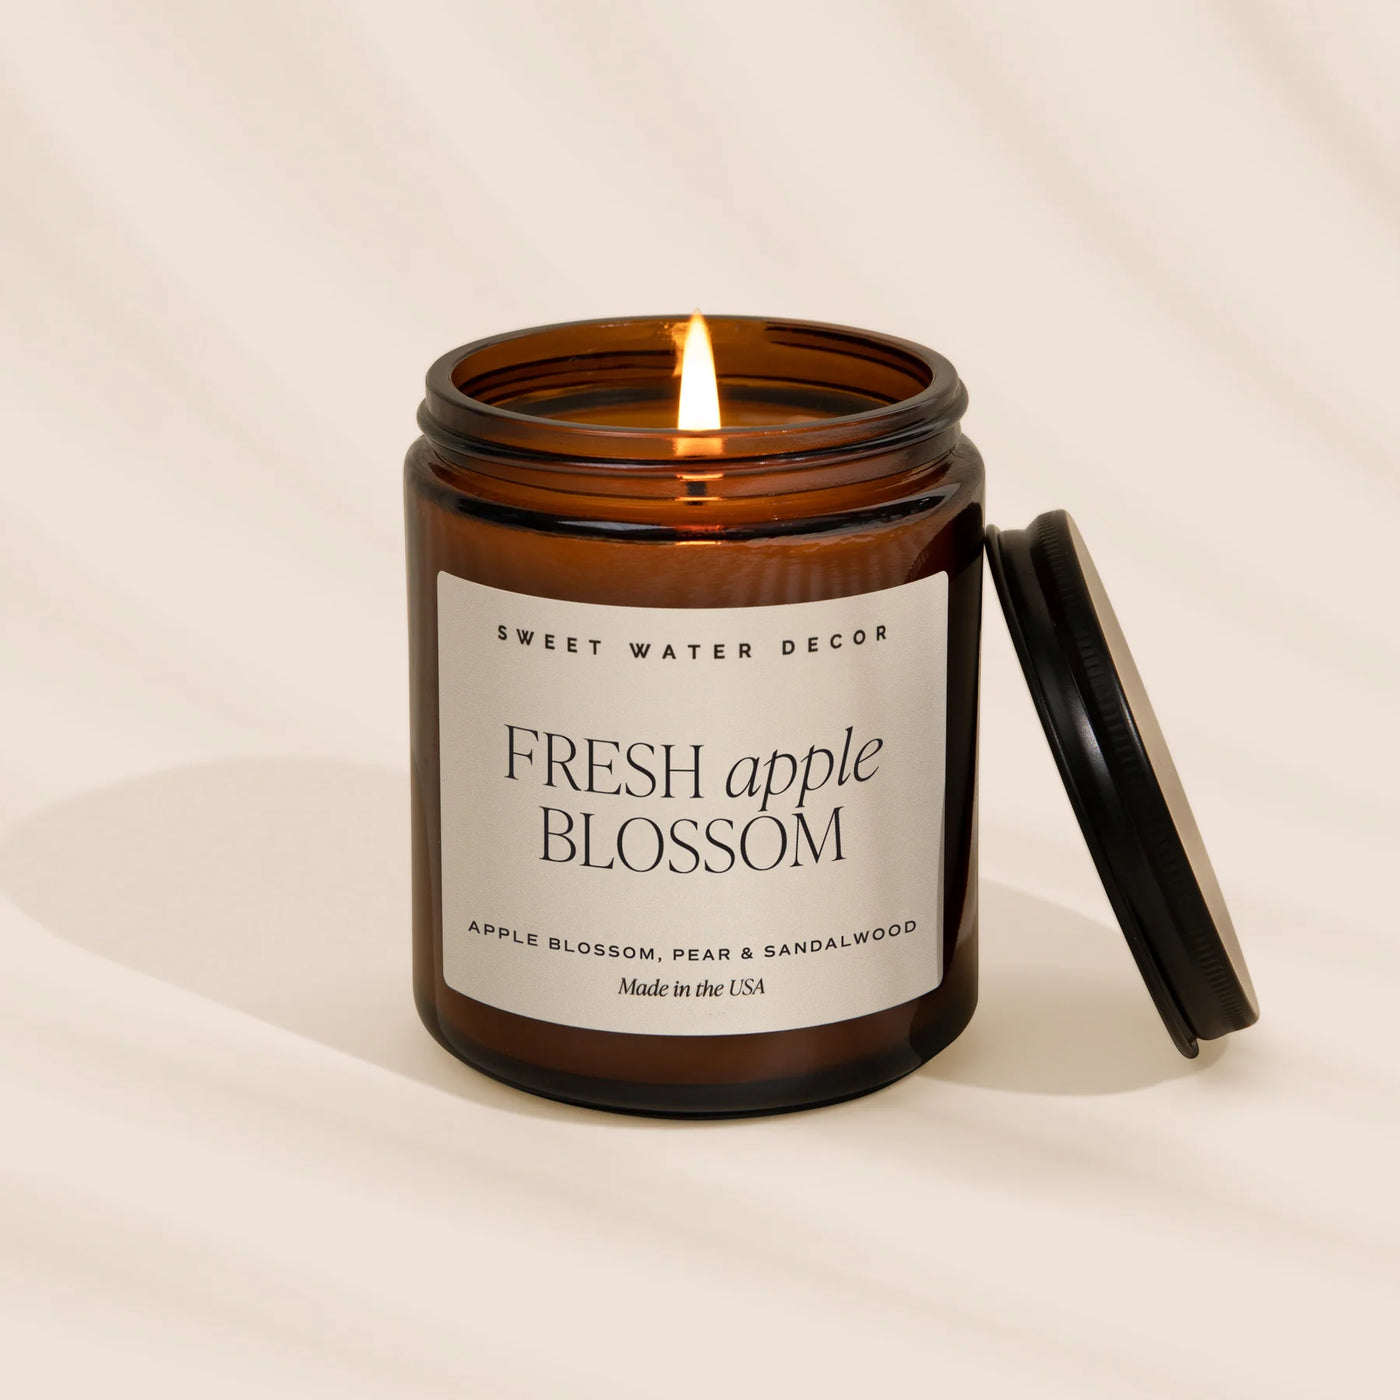 FRESH APPLE BLOSSOM SOY CANDLE